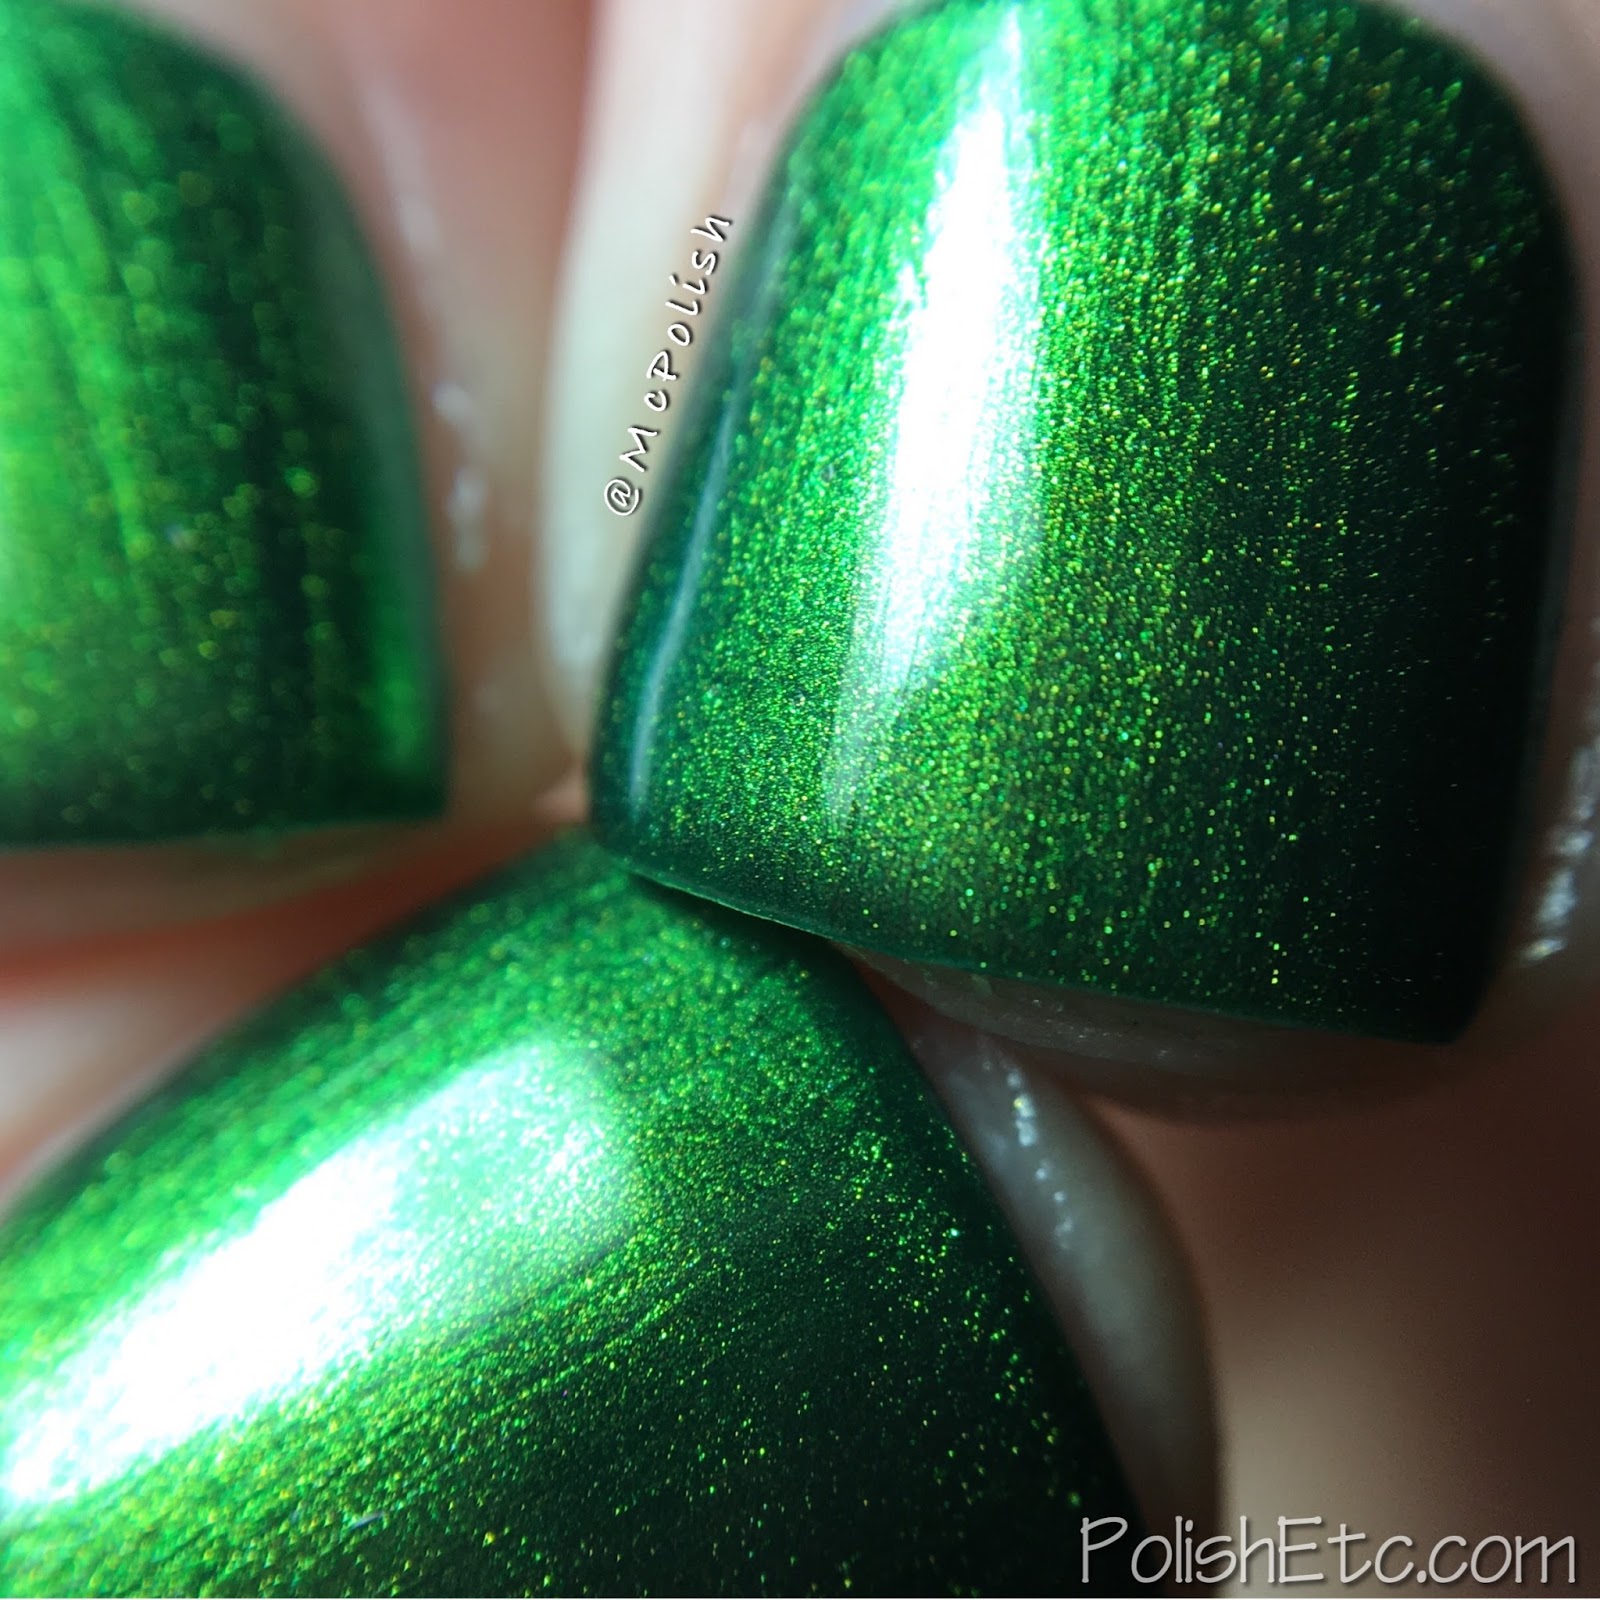 Great Lakes Lacquer - Polishing Poetic Collection - McPolish - Leave No Step Had Trodden